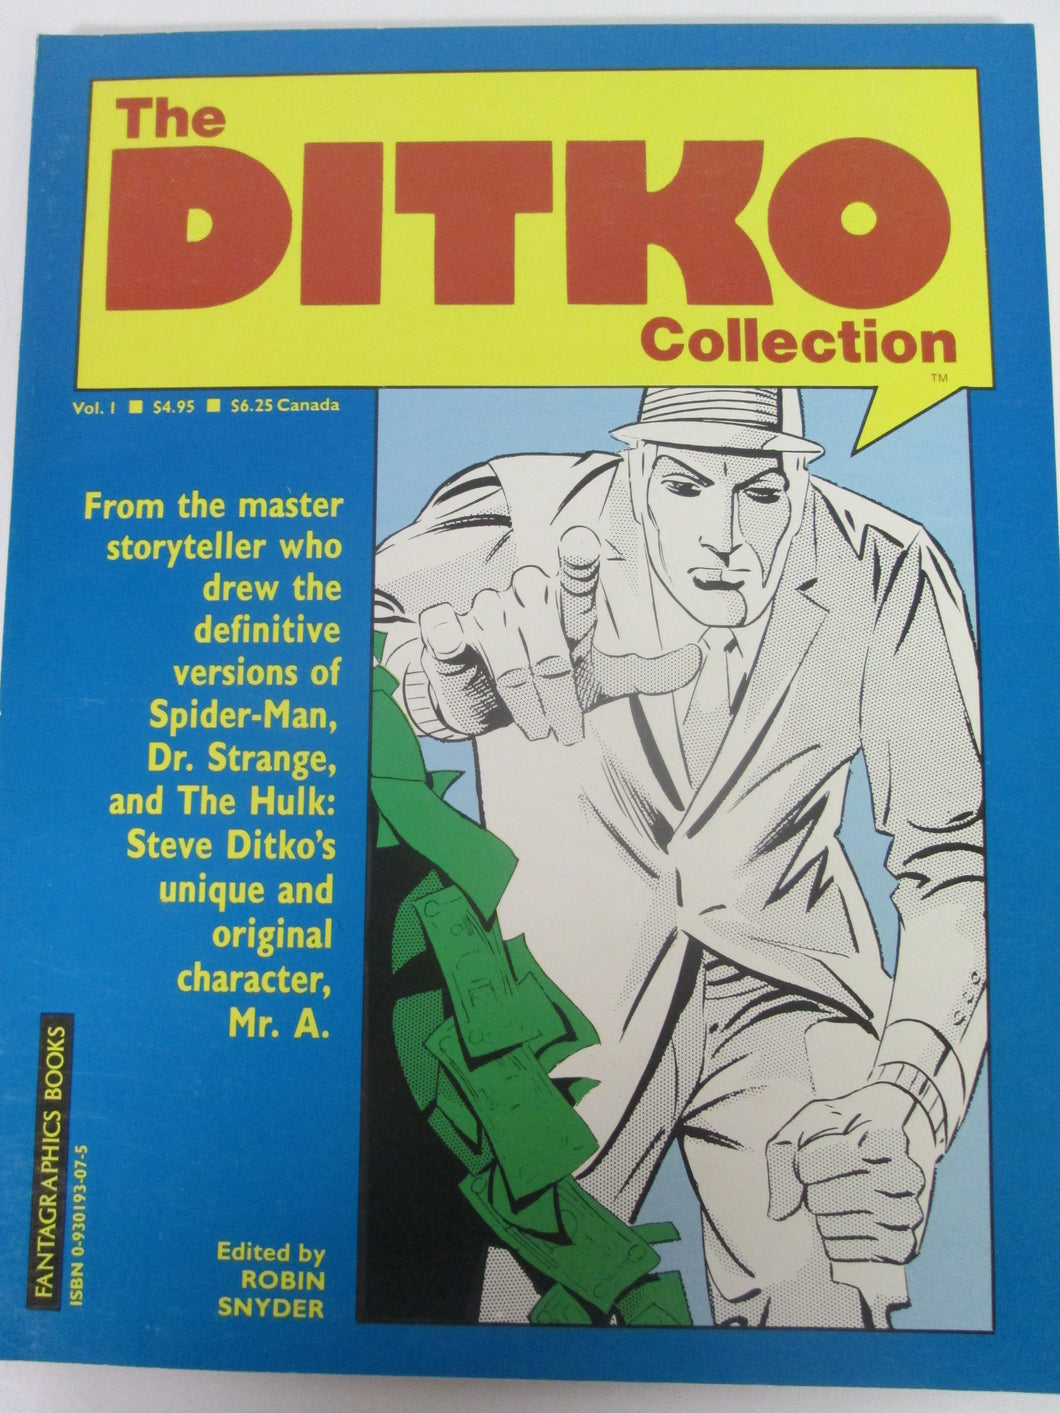 The Ditko Collection Vol 1 Fantagraphics  by Robin Snyder 1985 PB